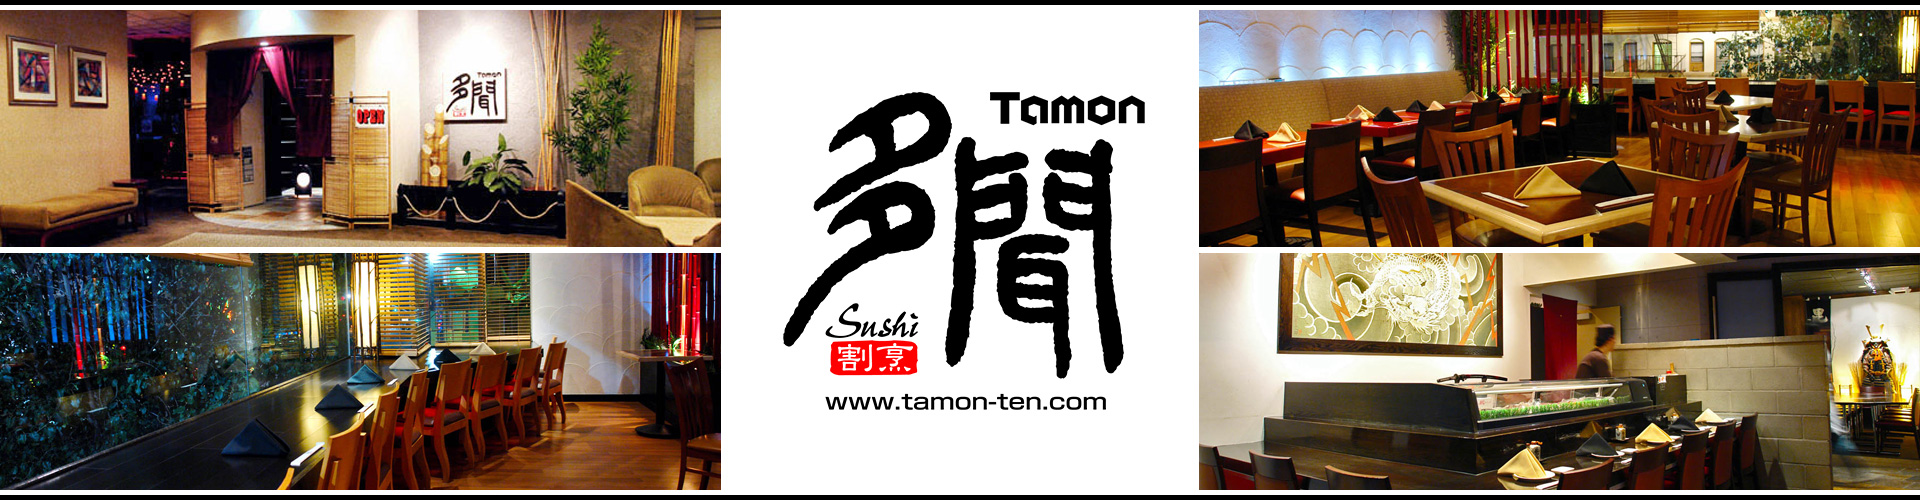 Sushi Tamon - Go to www.tamon-ten.com to learn more the detail.